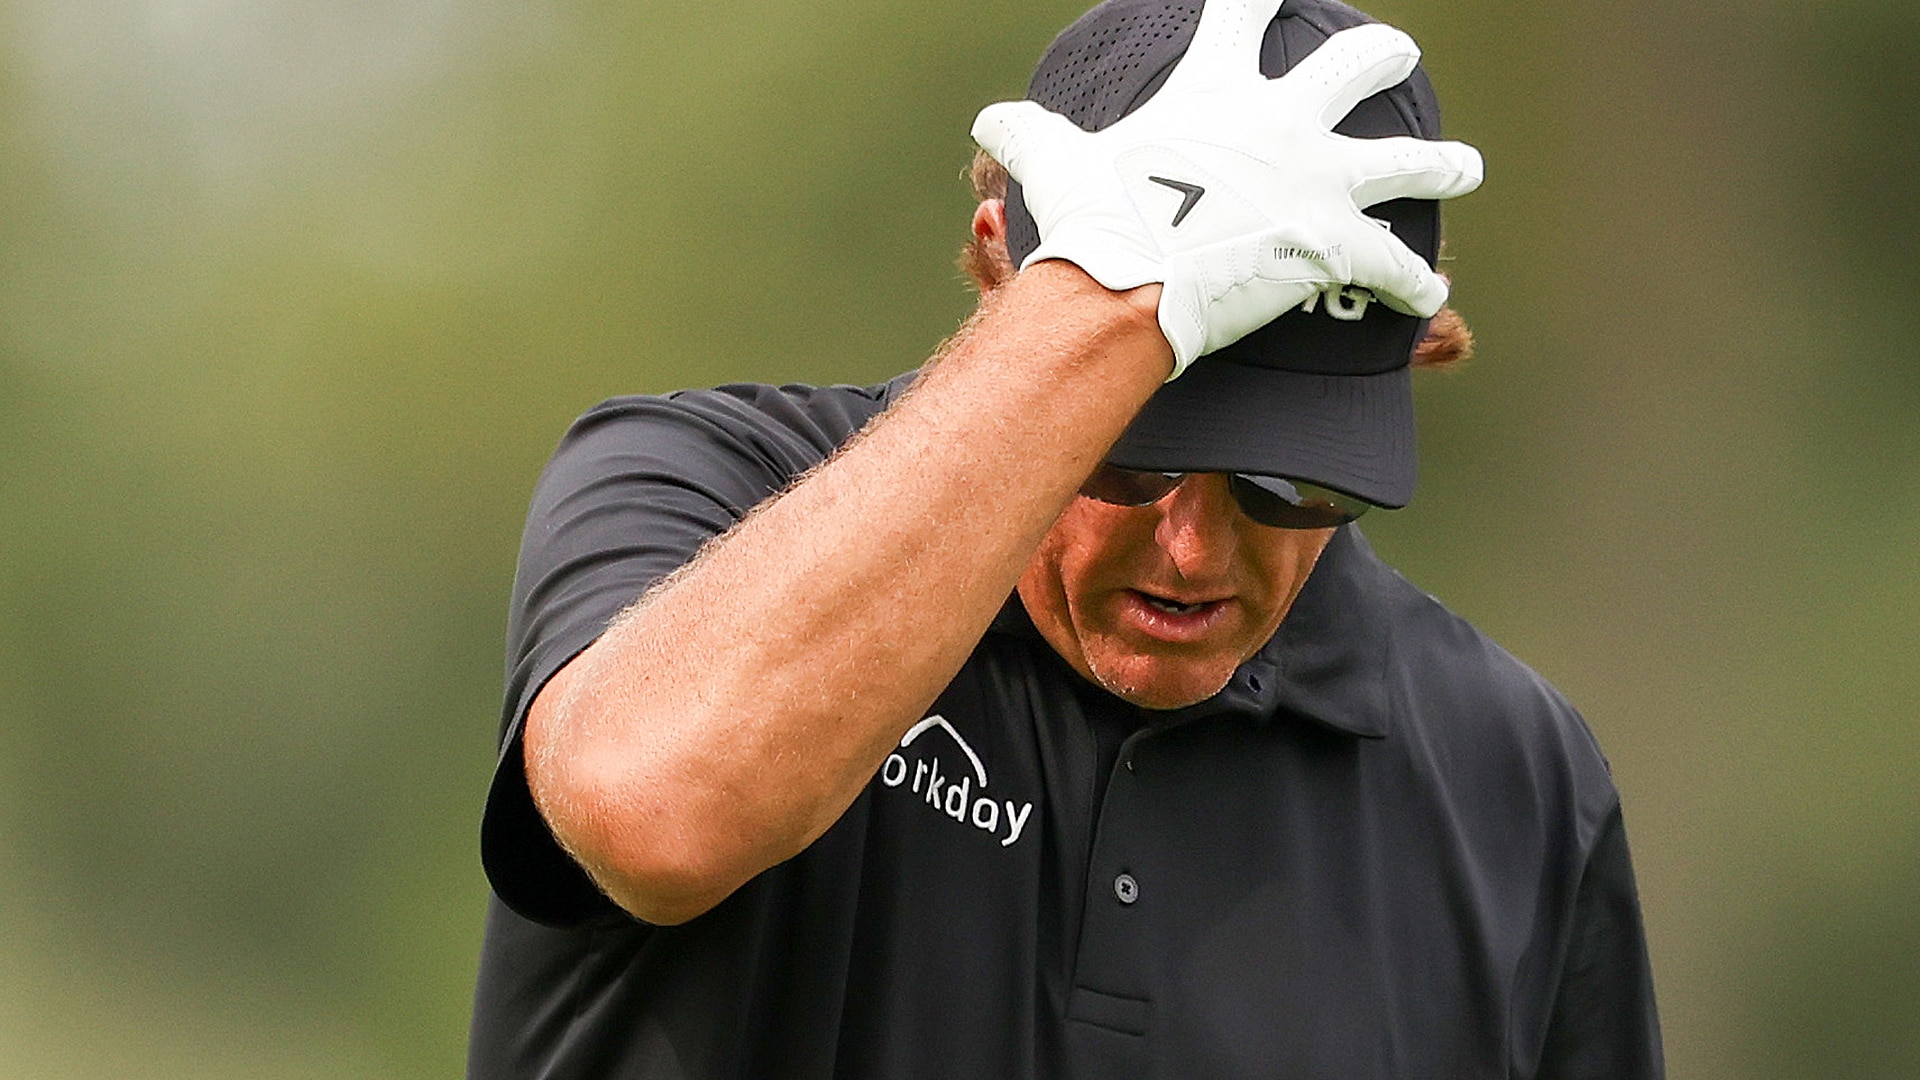 Phil Mickelson implodes with opening 79 at Winged Foot: 'I just played terrible' 2